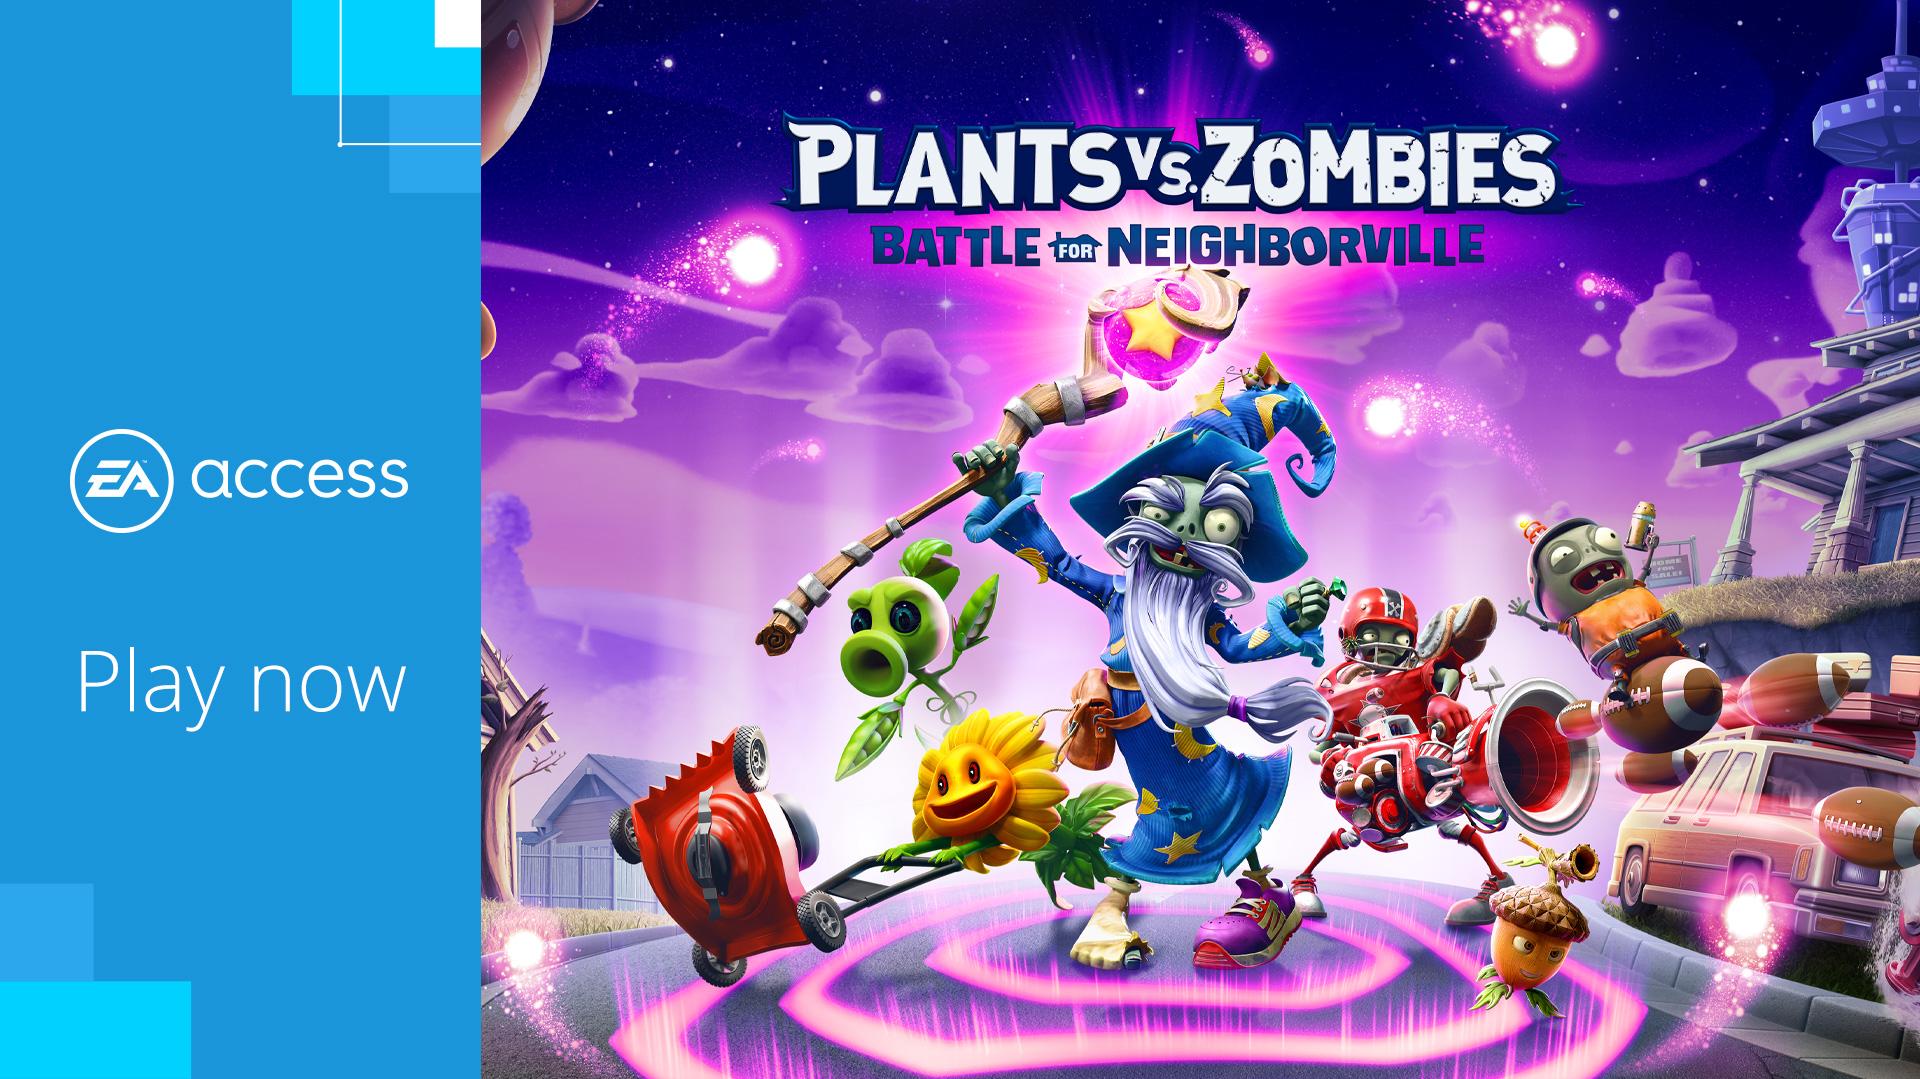 EA Play on Come on down to Neighborville PvZBfN enters